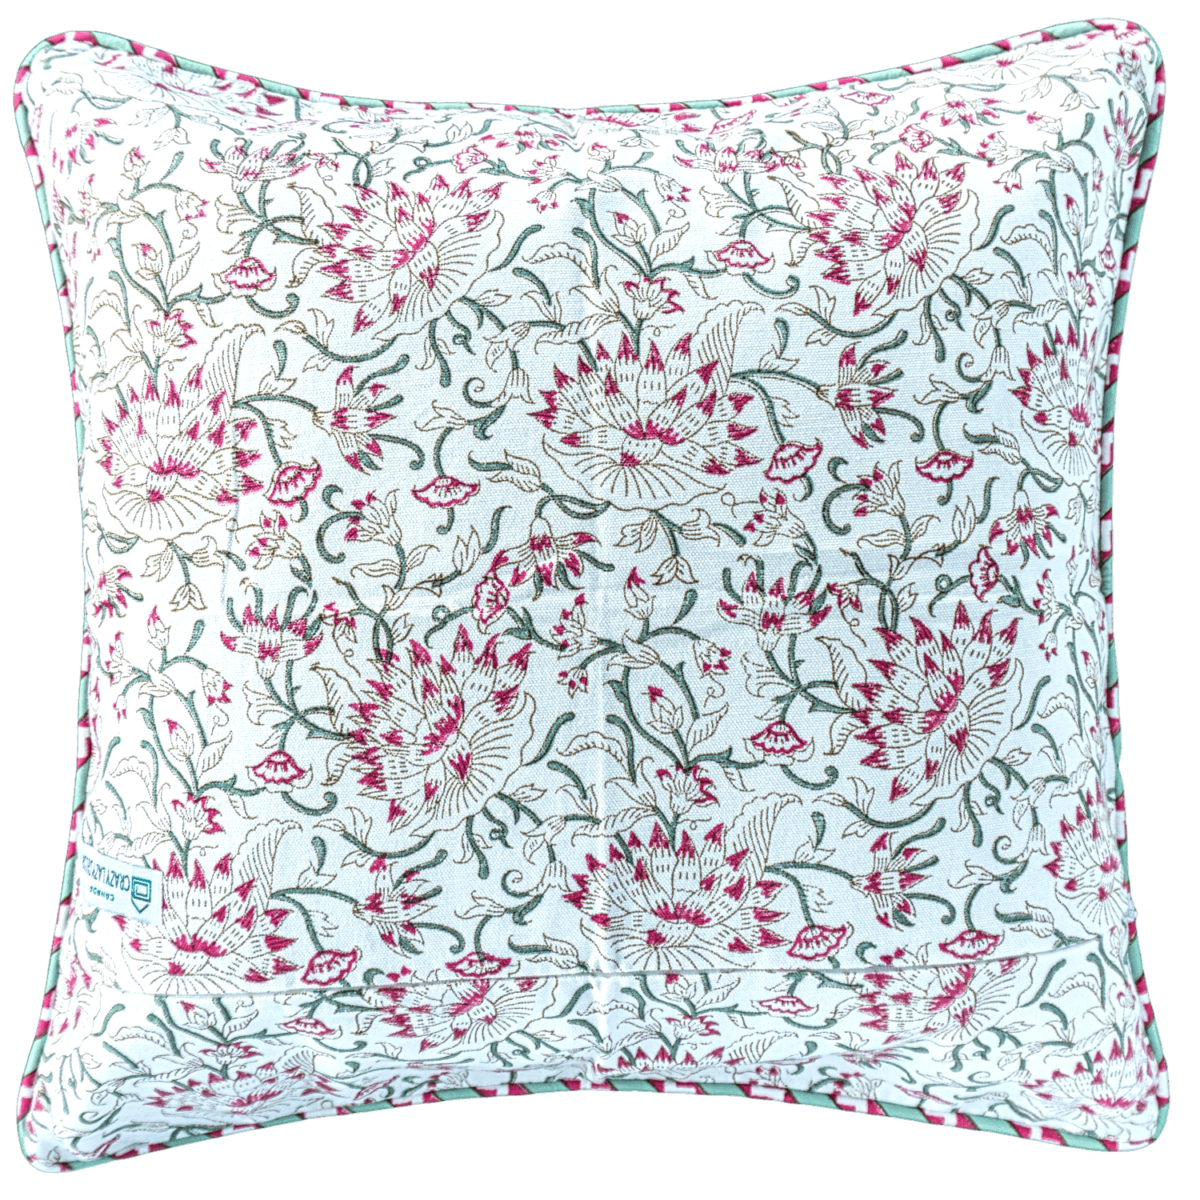 Daffodil flowers hand printed cotton decorative pillow 18" X18"